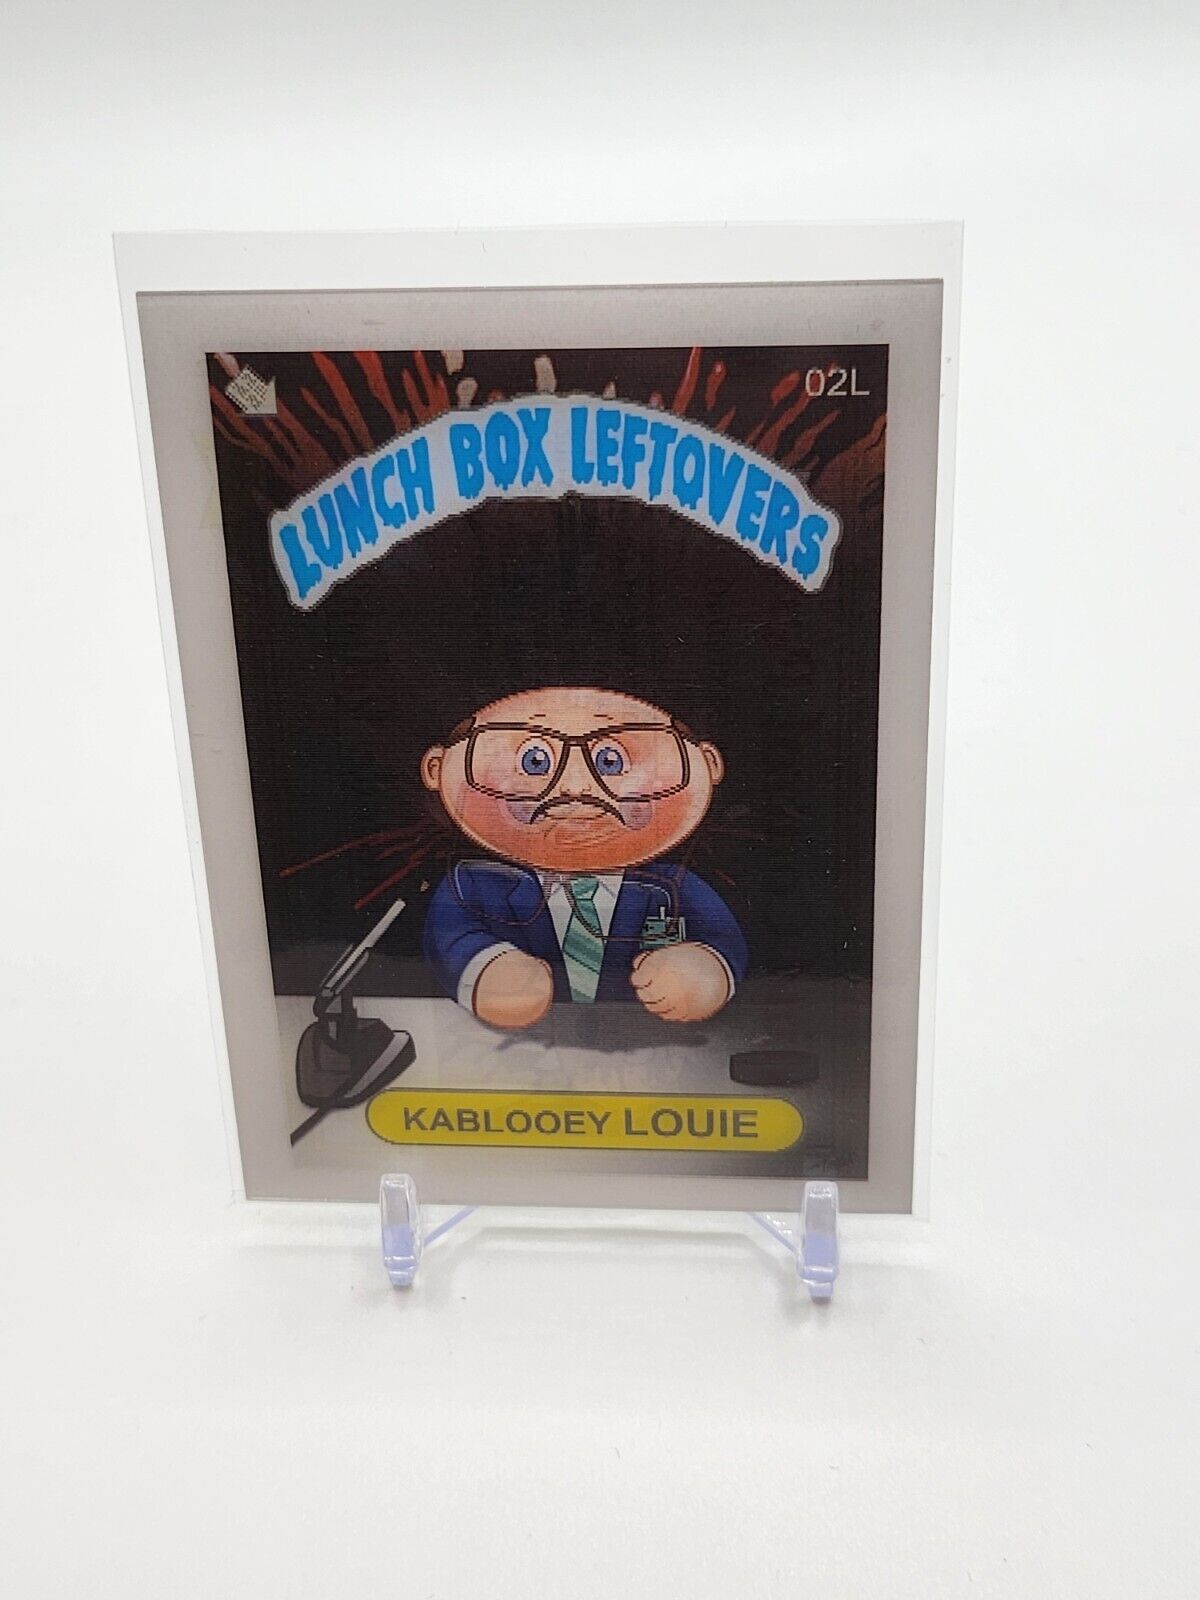 SSFC Lunch Box Leftovers Series 2 Lenticular Card - 02L KABLOOEY LOUIE